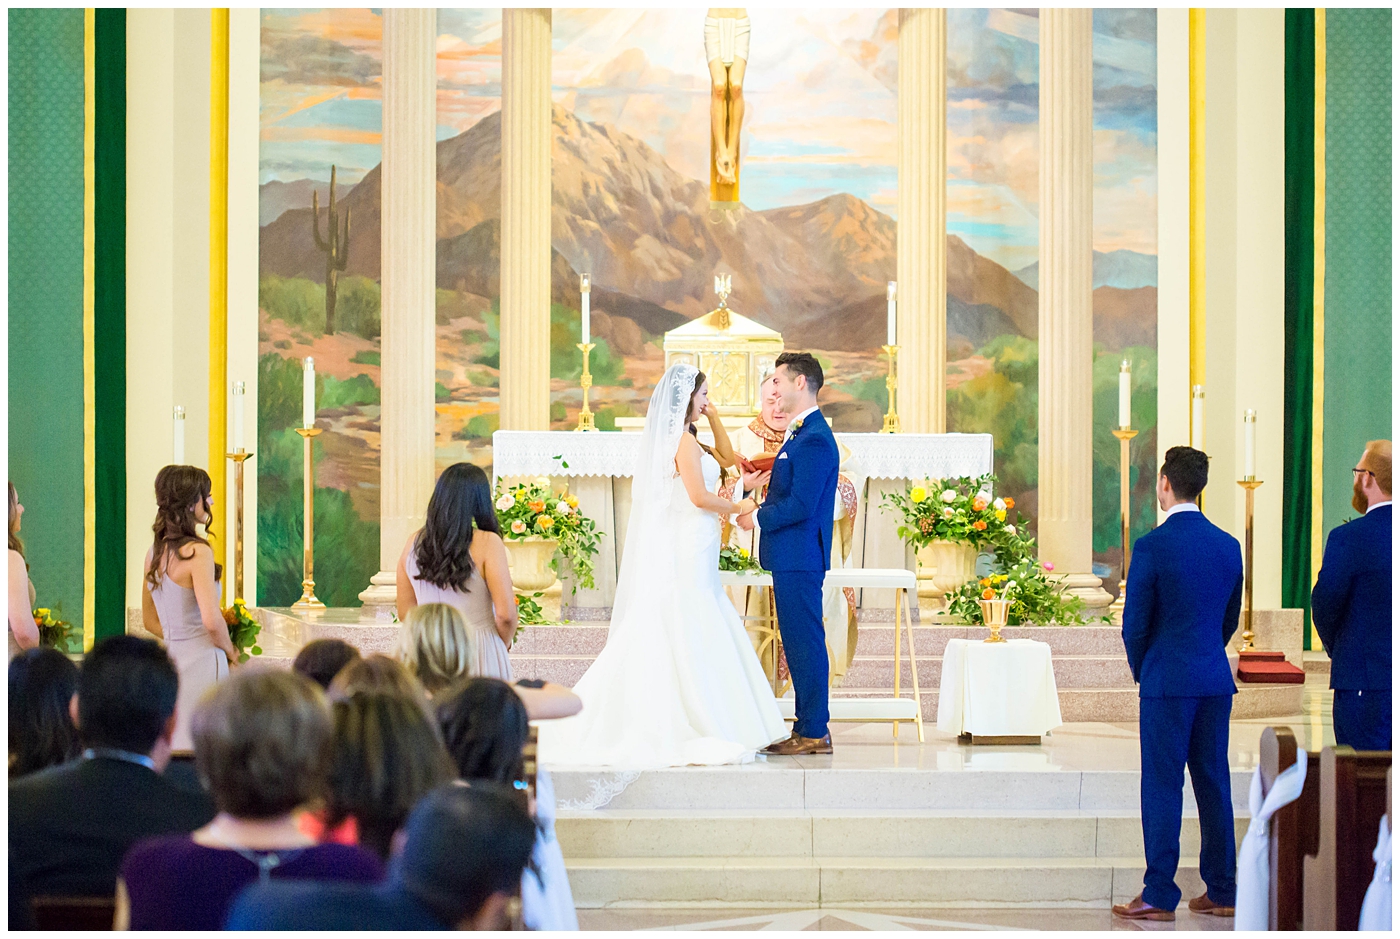 bride in lace cap sleeve wedding dress with bright pink, yellow and green flower bouquets with groom in blue suit on wedding day at church ceremony